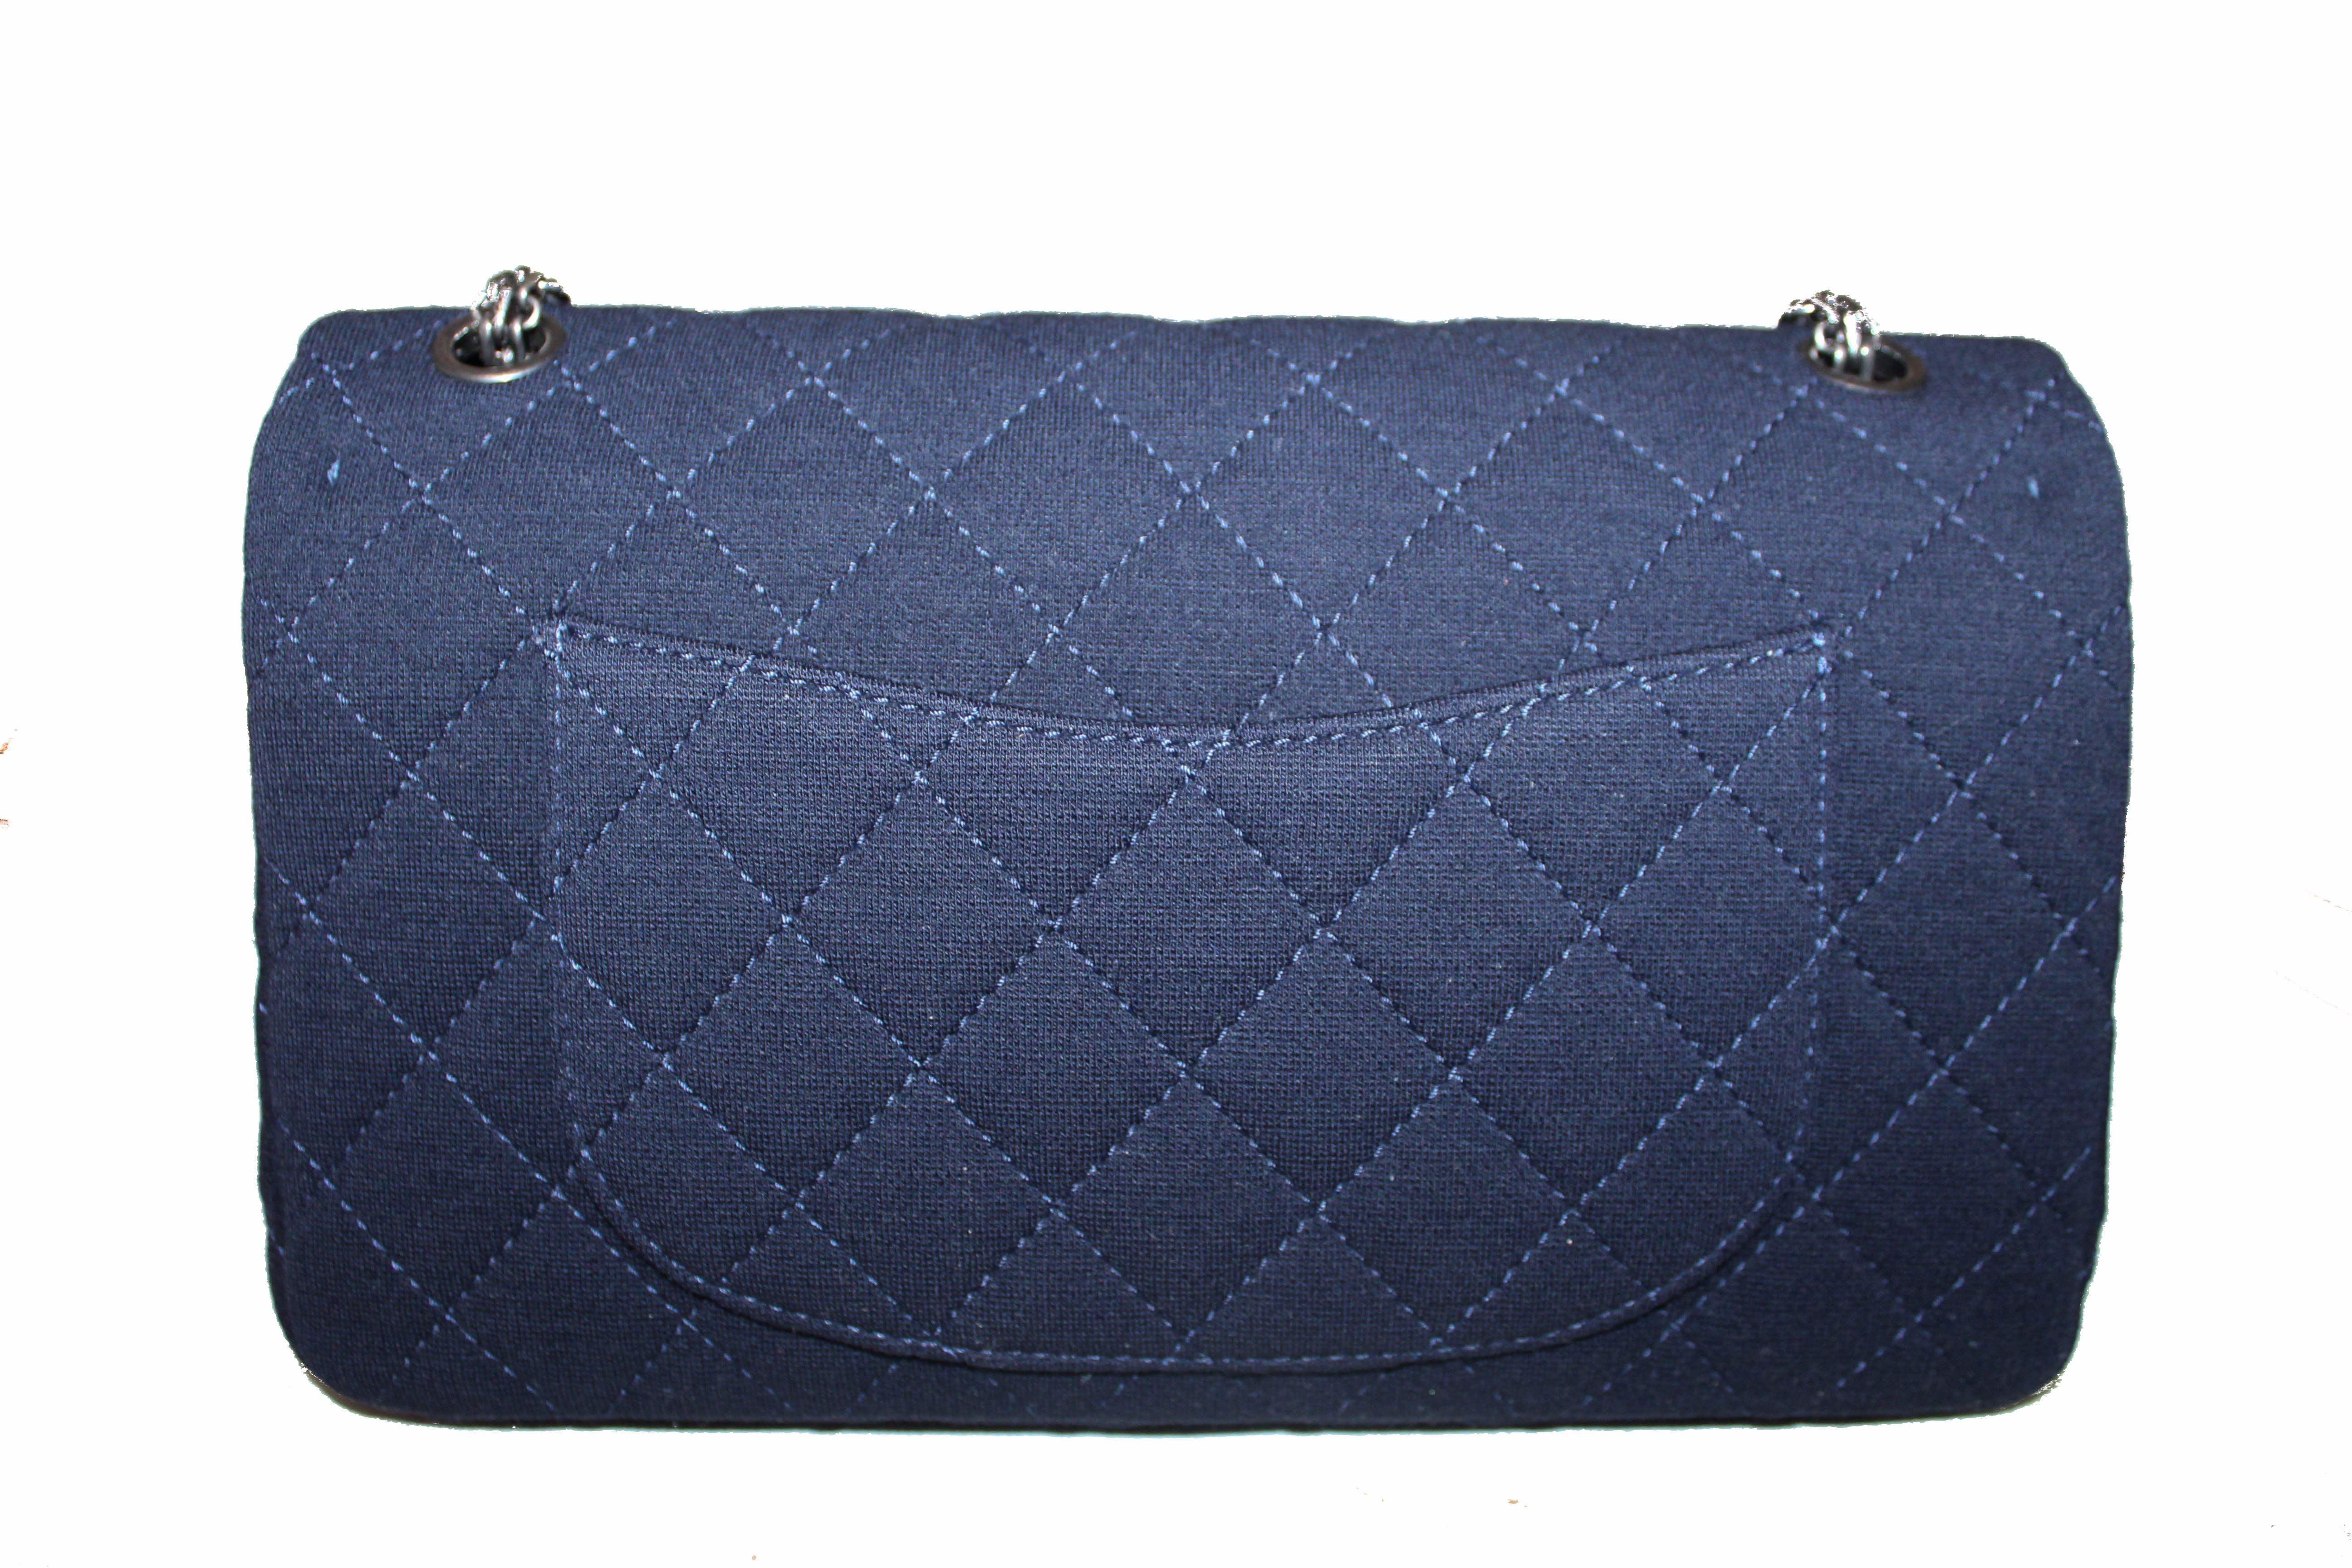 Authentic Chanel Navy Blue Fabric Canvas Jersey Large 2.55 Reissue 226 Shoulder Bag